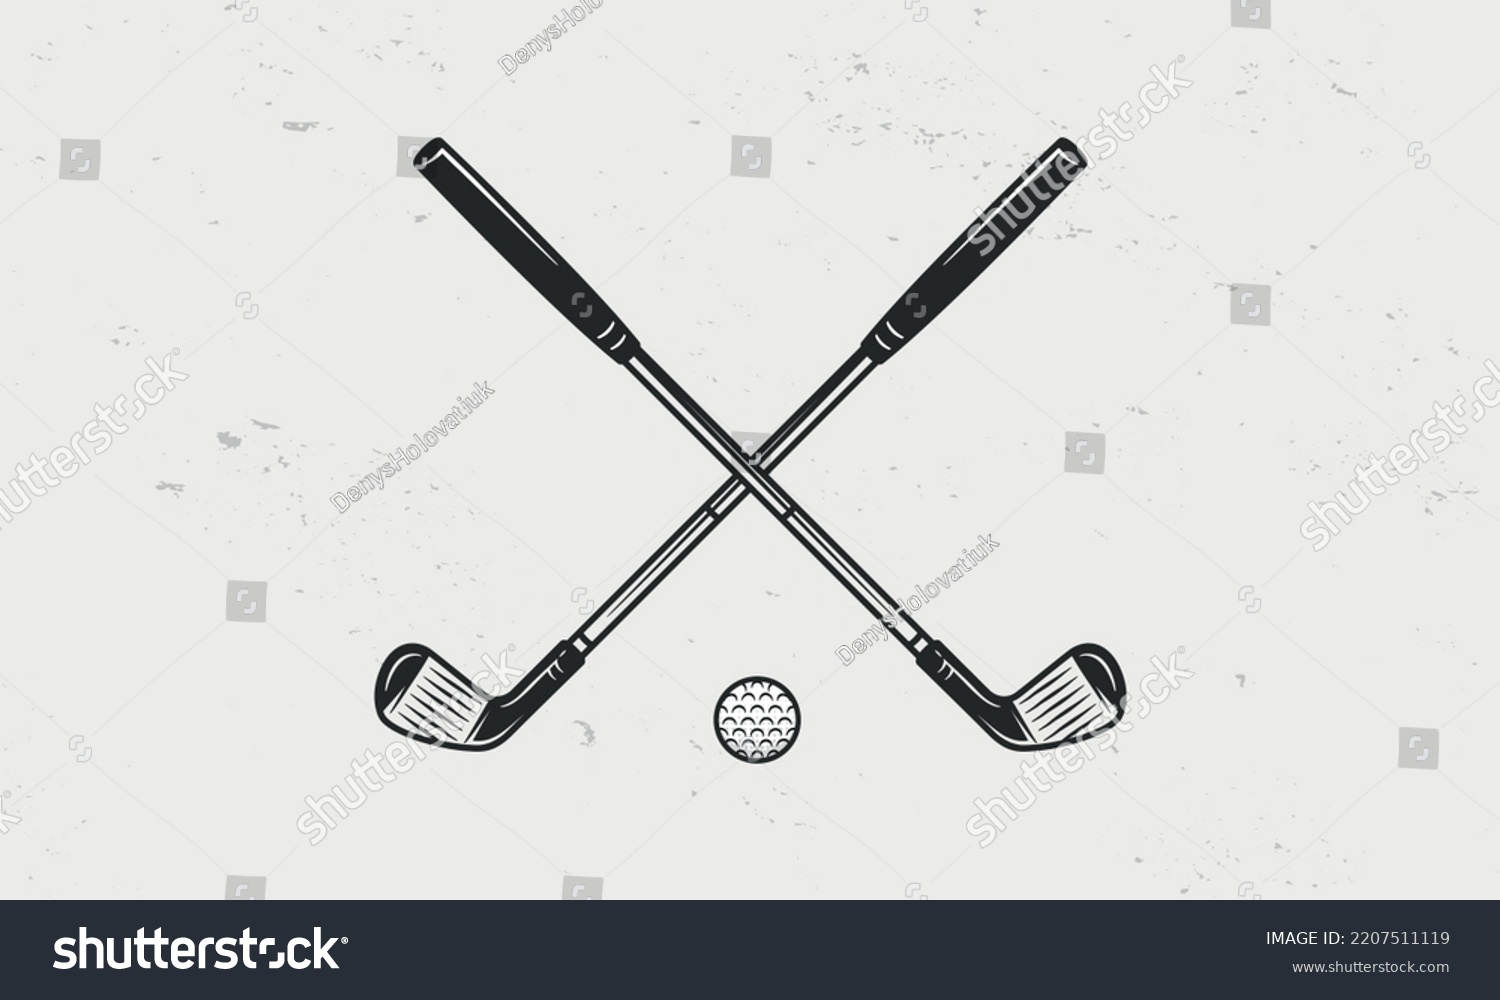 Golf icon, logo. Golf clubs, ball isolated on white background. Crossed Golf clubs. Vintage design elements for logo, badges, banners, labels. Vector illustration #2207511119